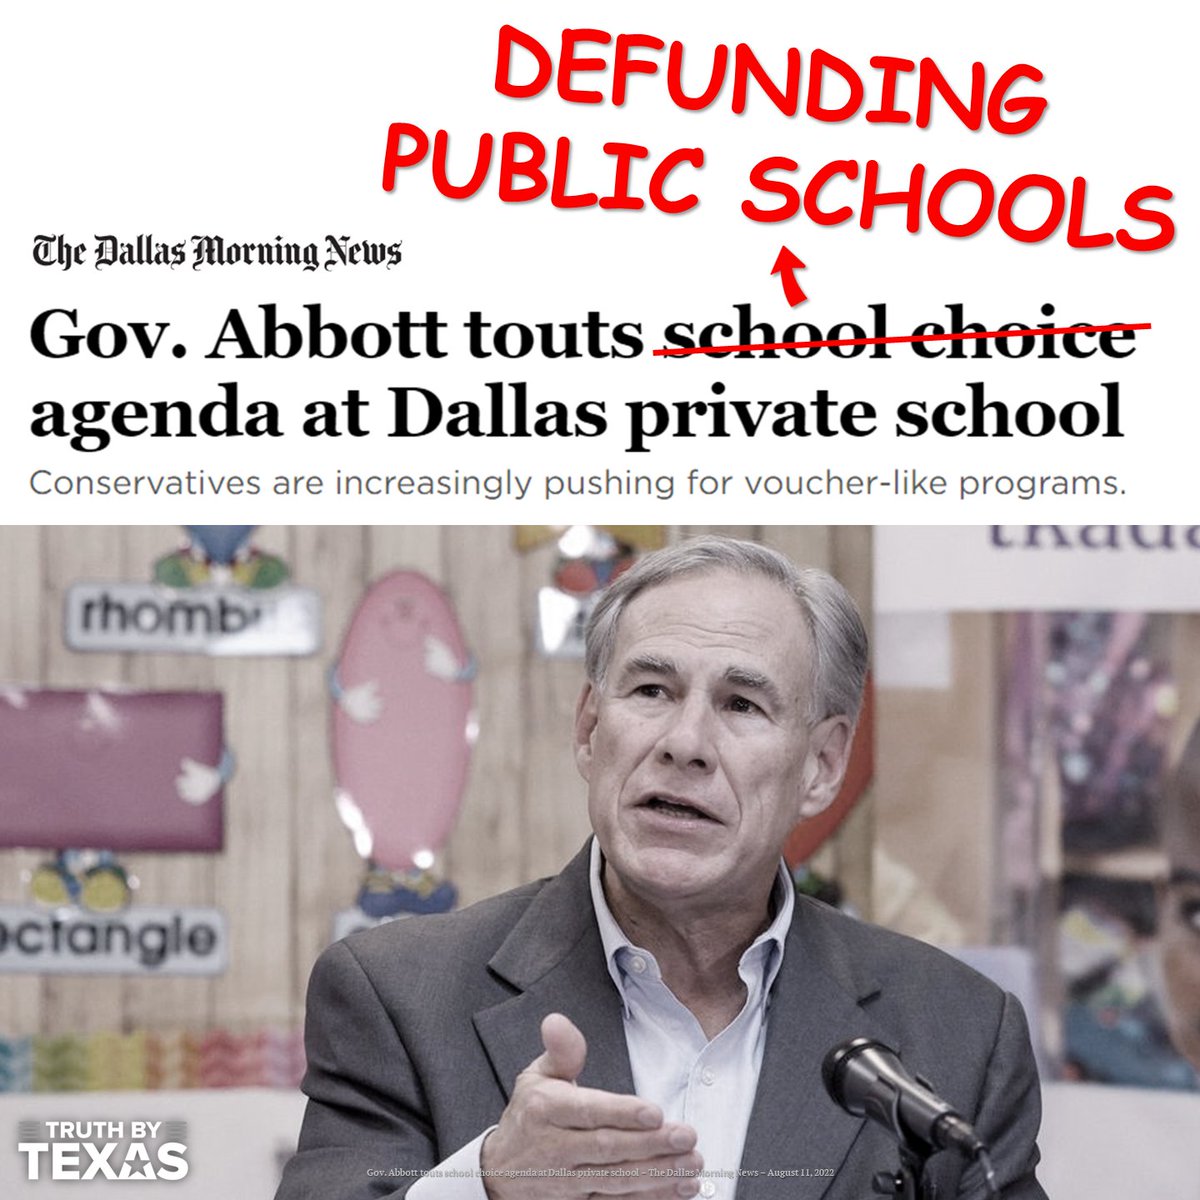 Families in Texas can *already* send their children to Private + Exclusive Religious Schools. But that's not enough for our Republican Gov Greg Abbott & the Texas GOP:

They want to funnel *Your* Public Taxpayer $ into those Private Religious Orgs as well.